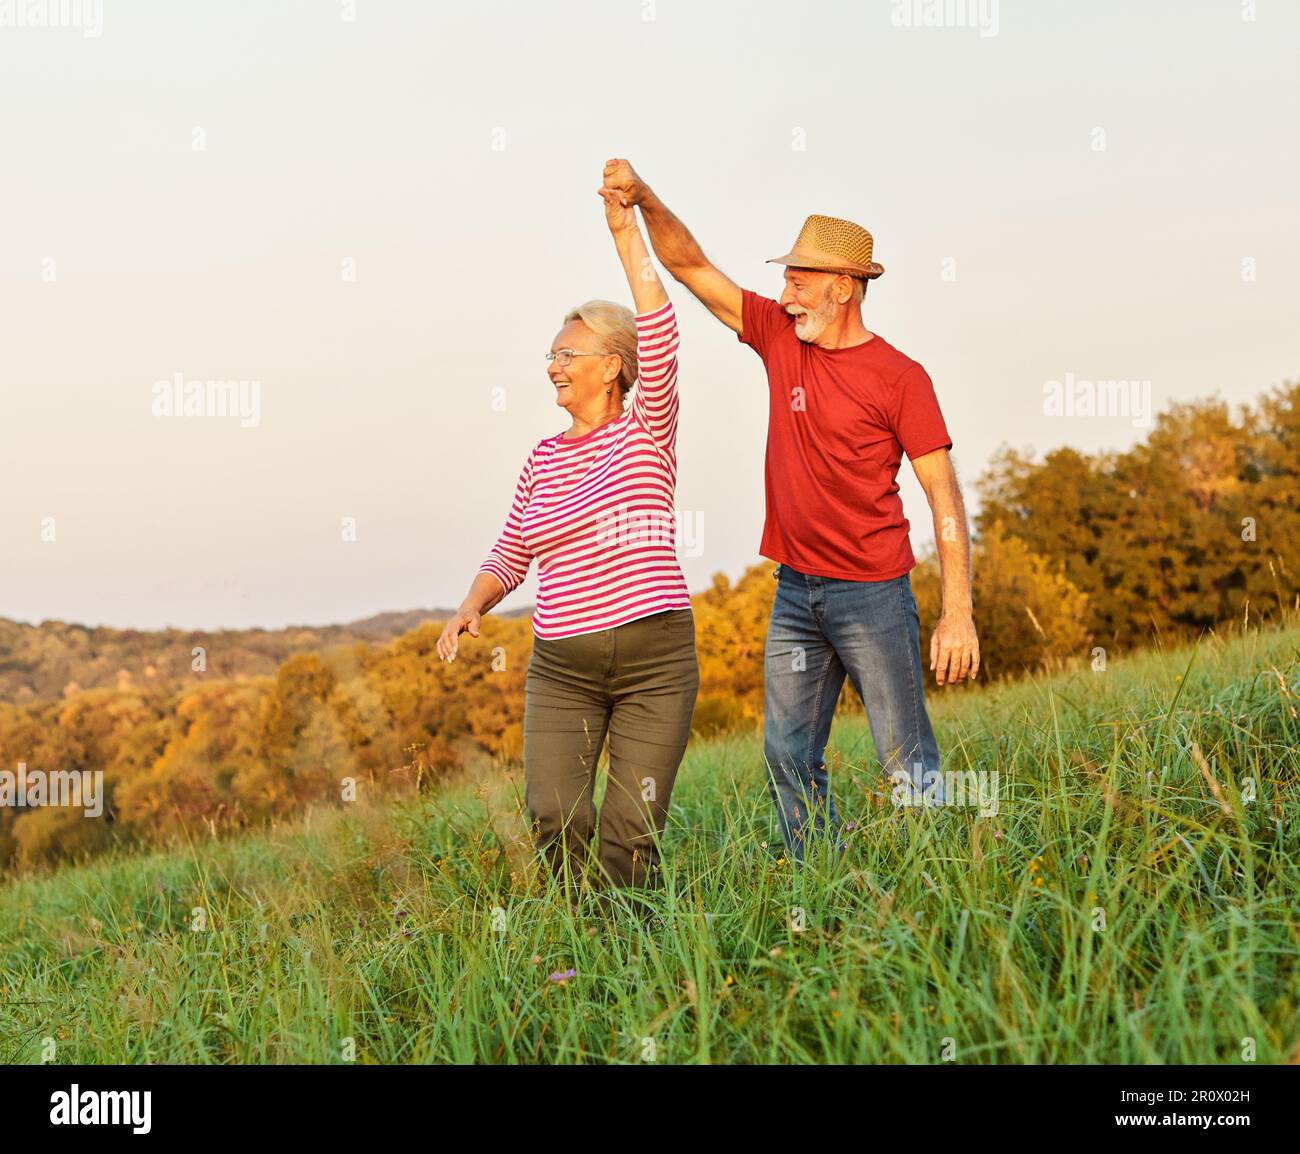 woman man outdoor senior couple happy lifestyle retirement together smiling love dancing nature mature Stock Photo